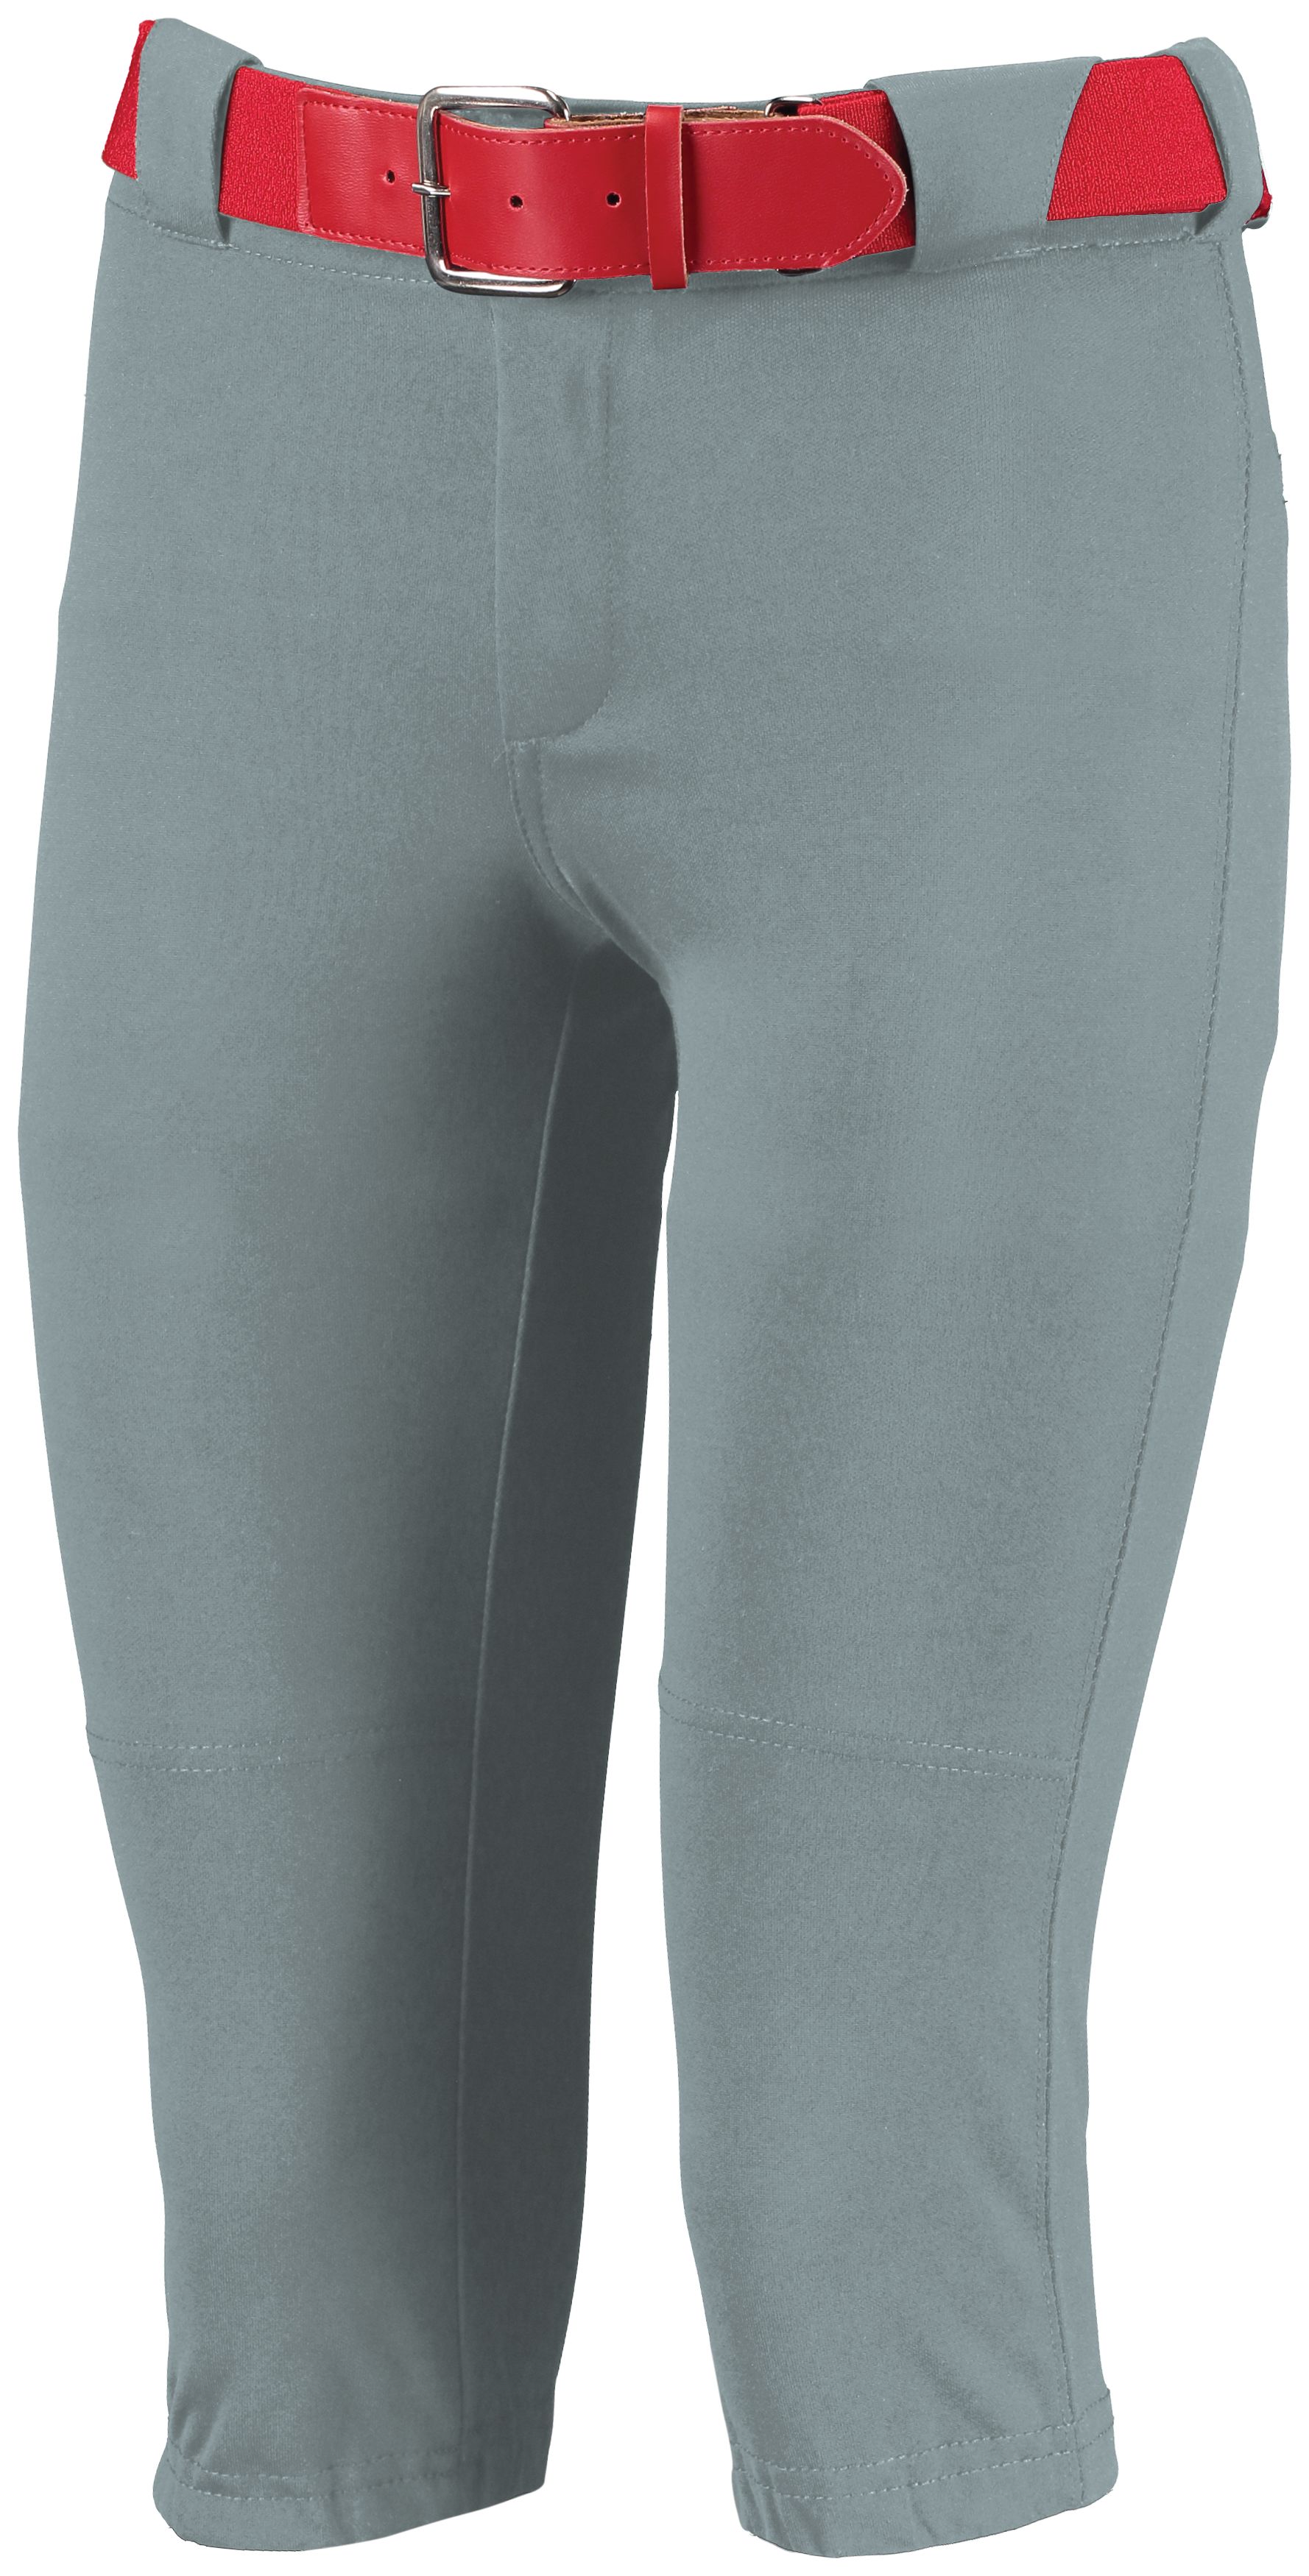 Large Russell White Low Rise Women's Softball Pants 